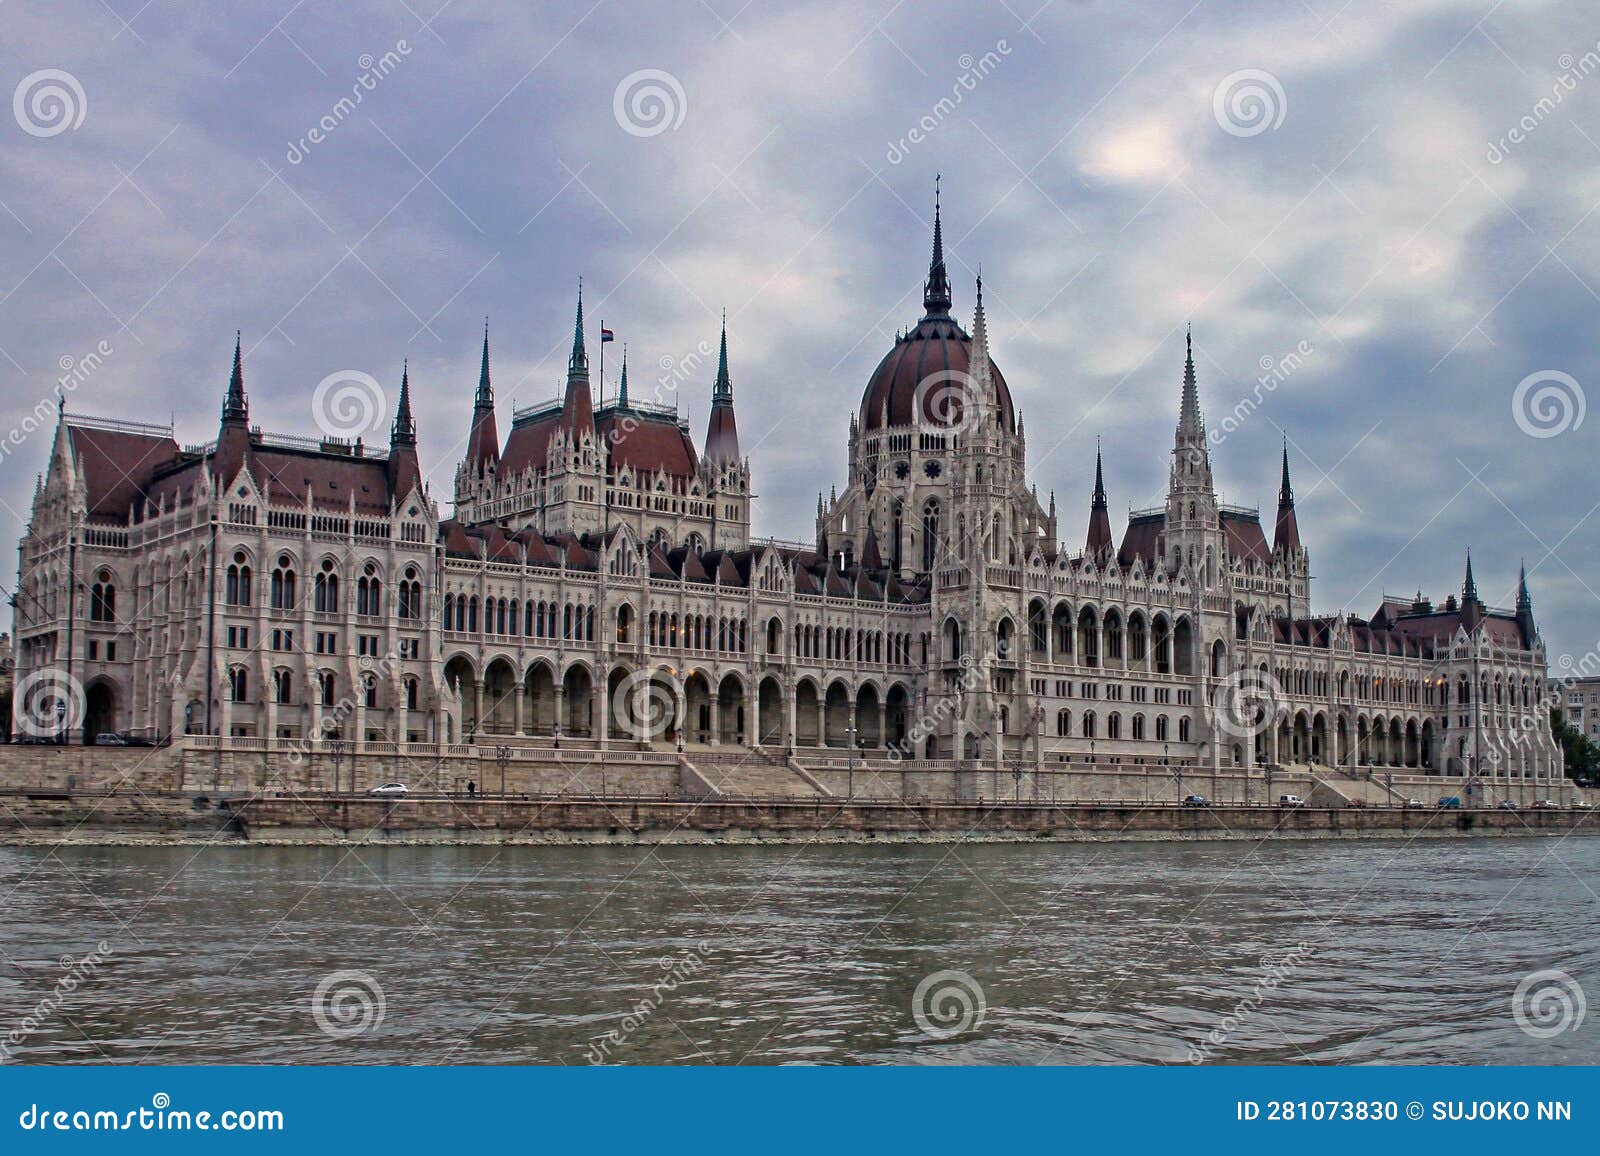 hungarian parlement building on the danube